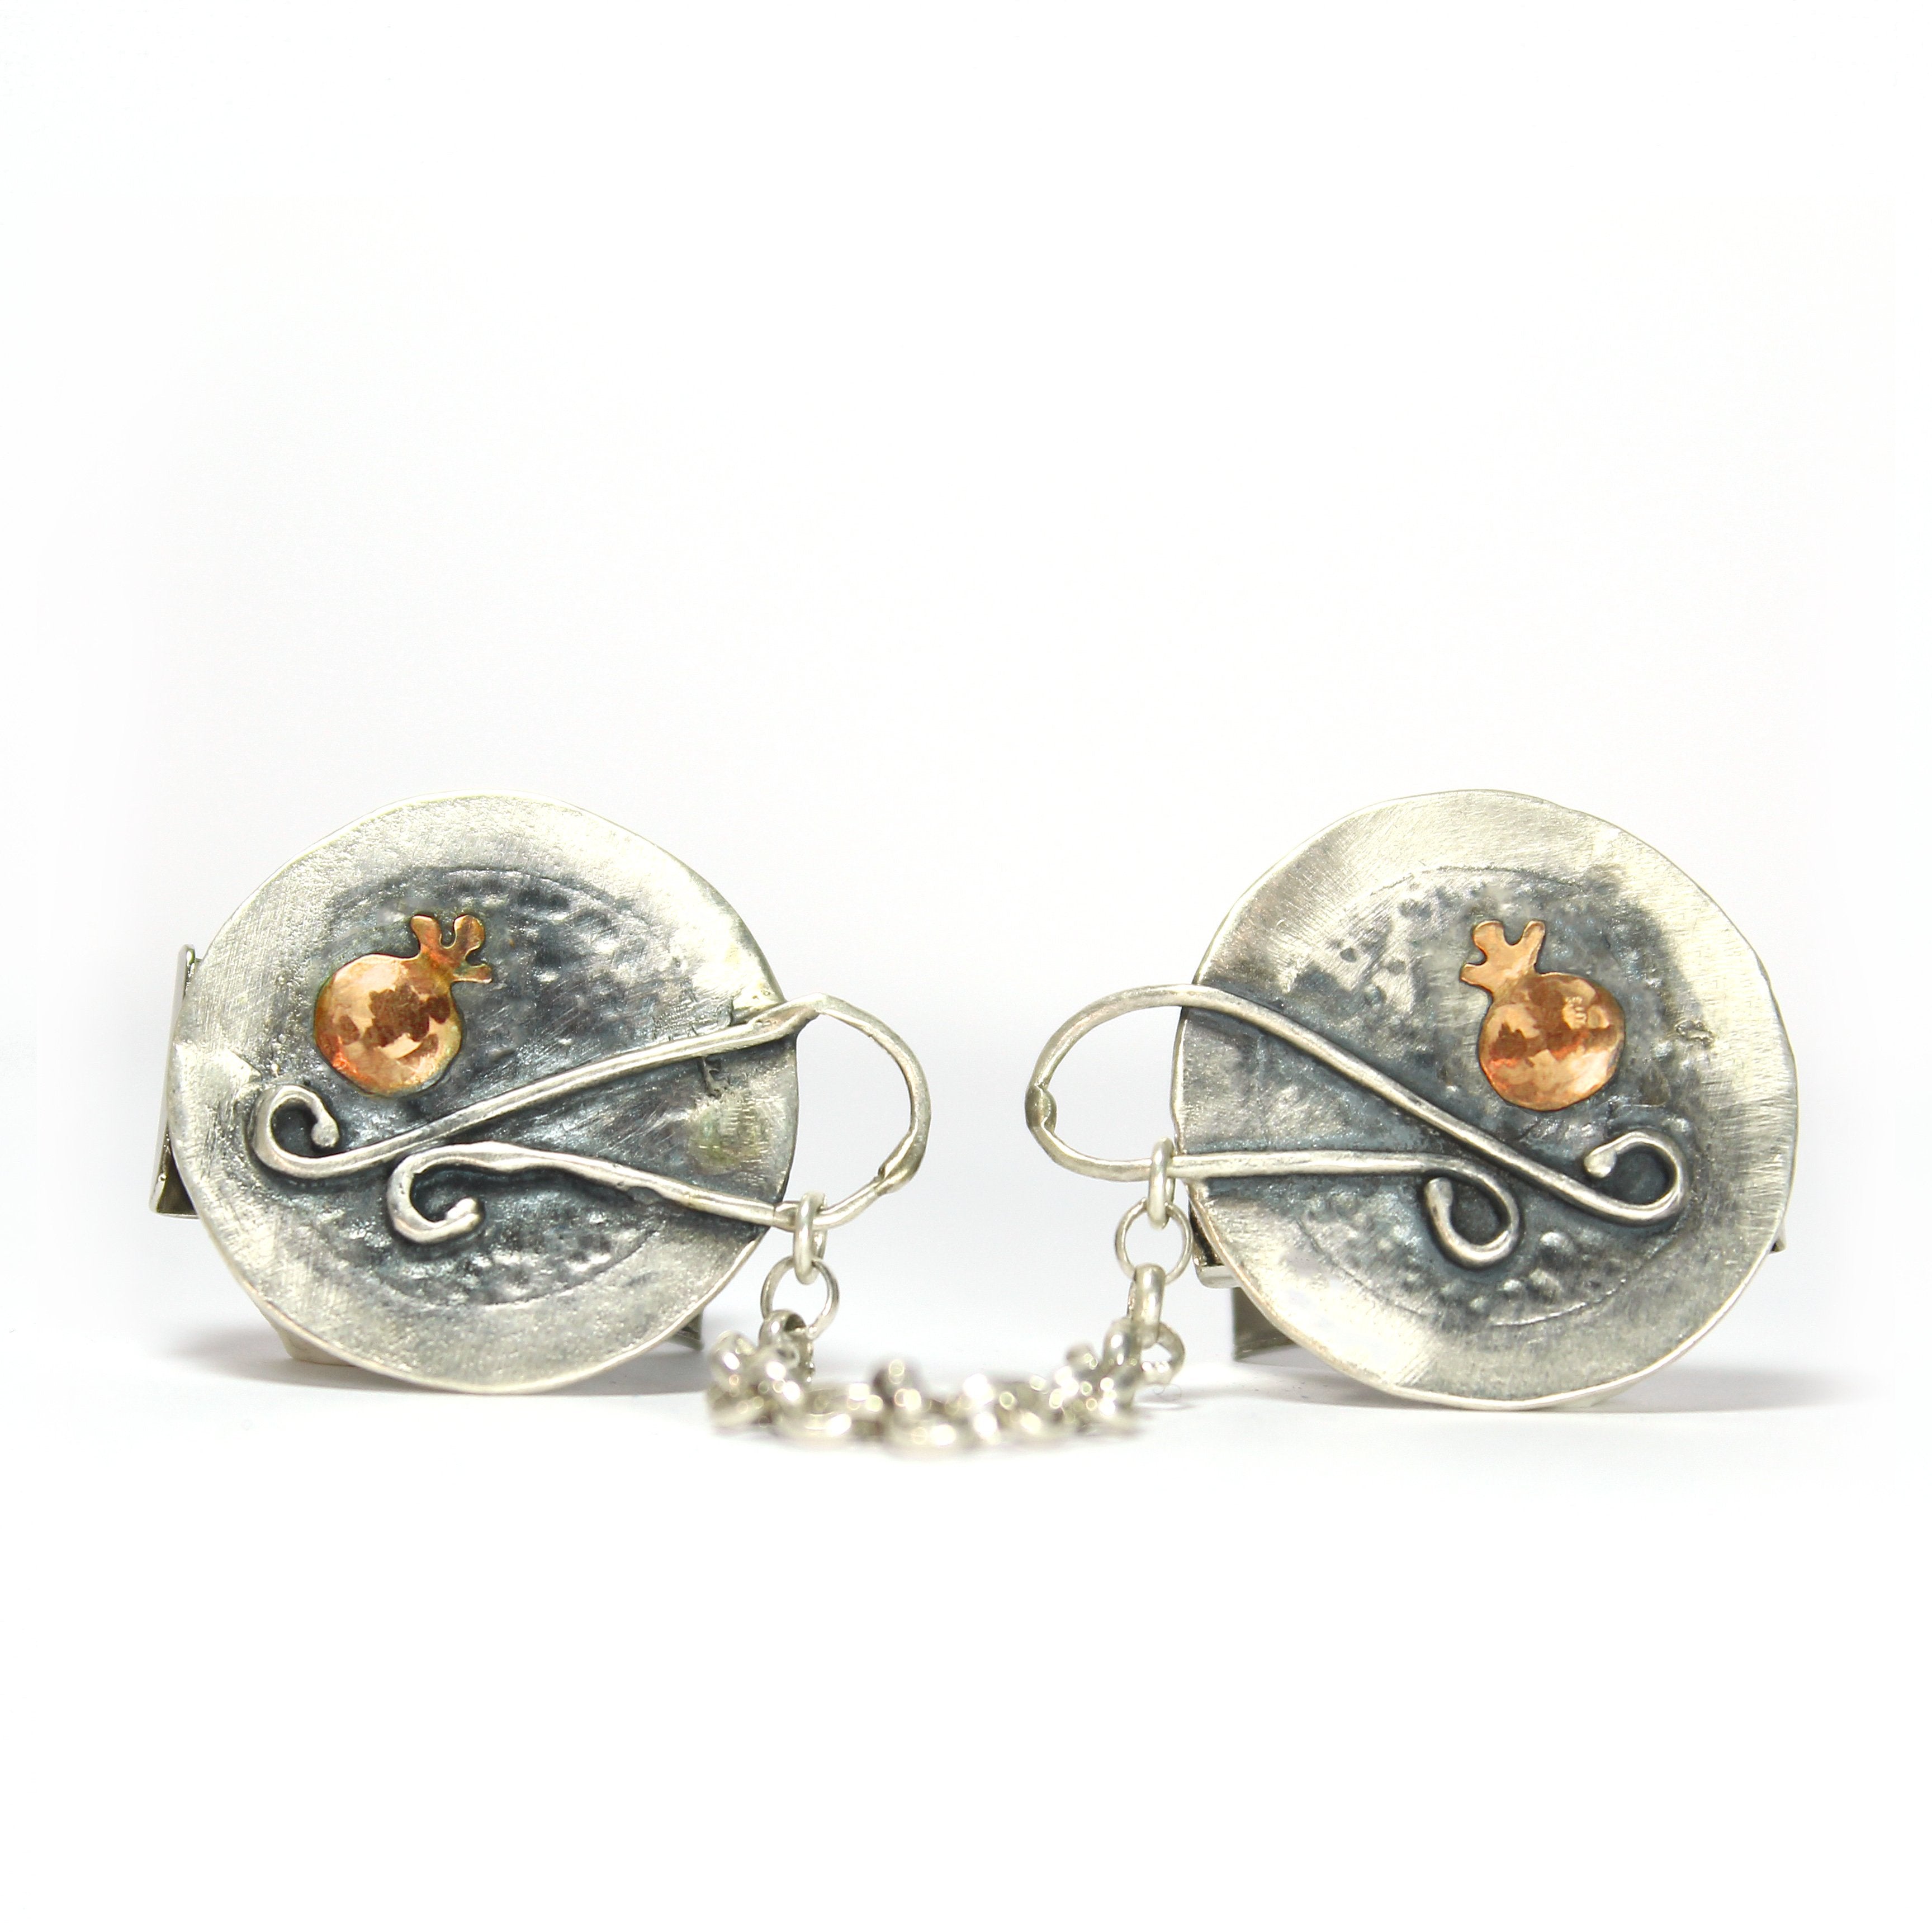 Pomegranate- Silver & Gold Tallit Clips - Shulamit Kanter Official Store